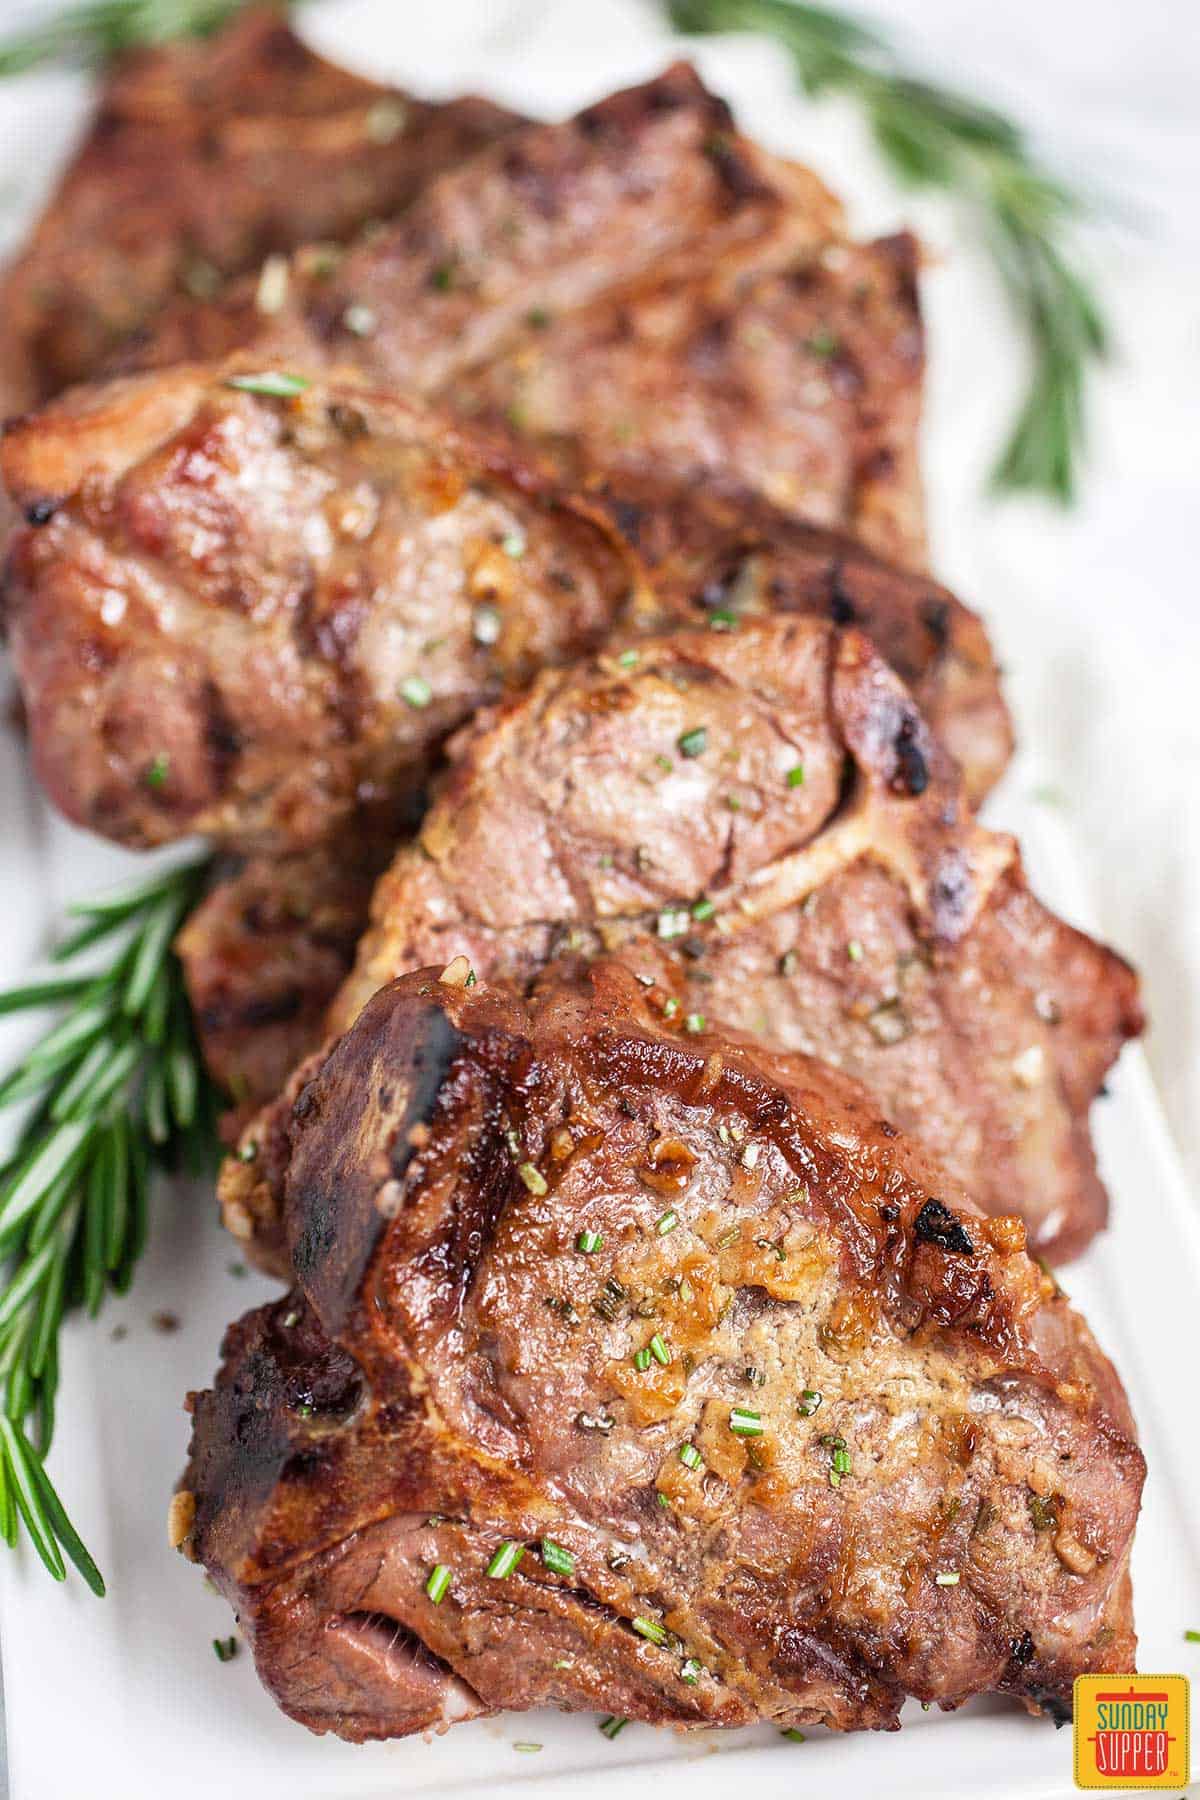 Five grilled lamb chops in a row on a white plate with fresh sprigs of rosemary